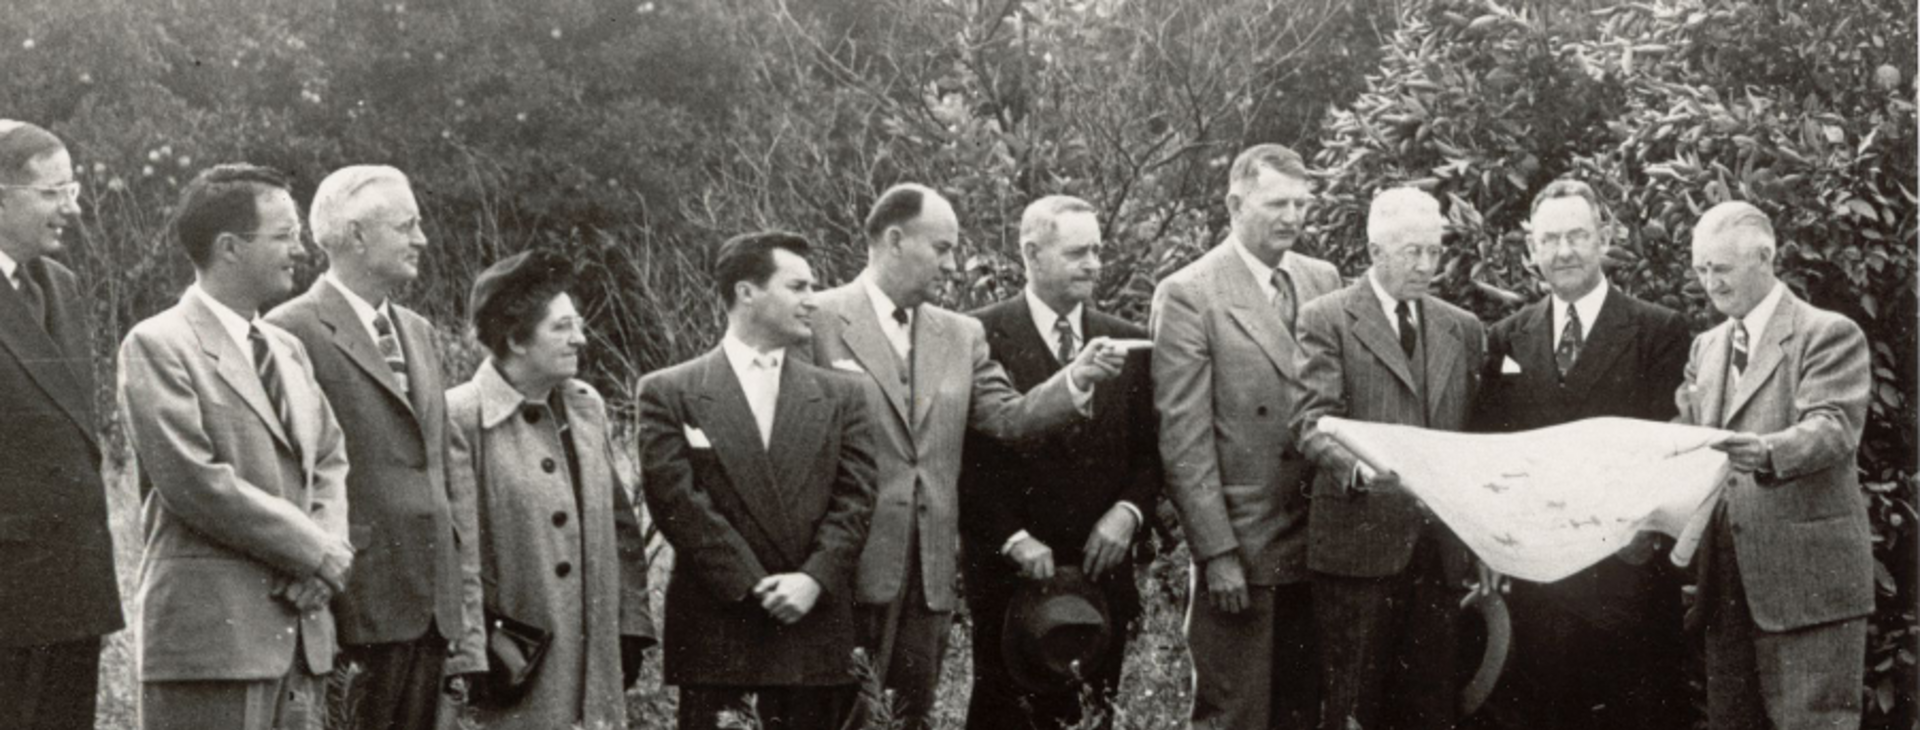 old photo from 1952 of groundbreaking